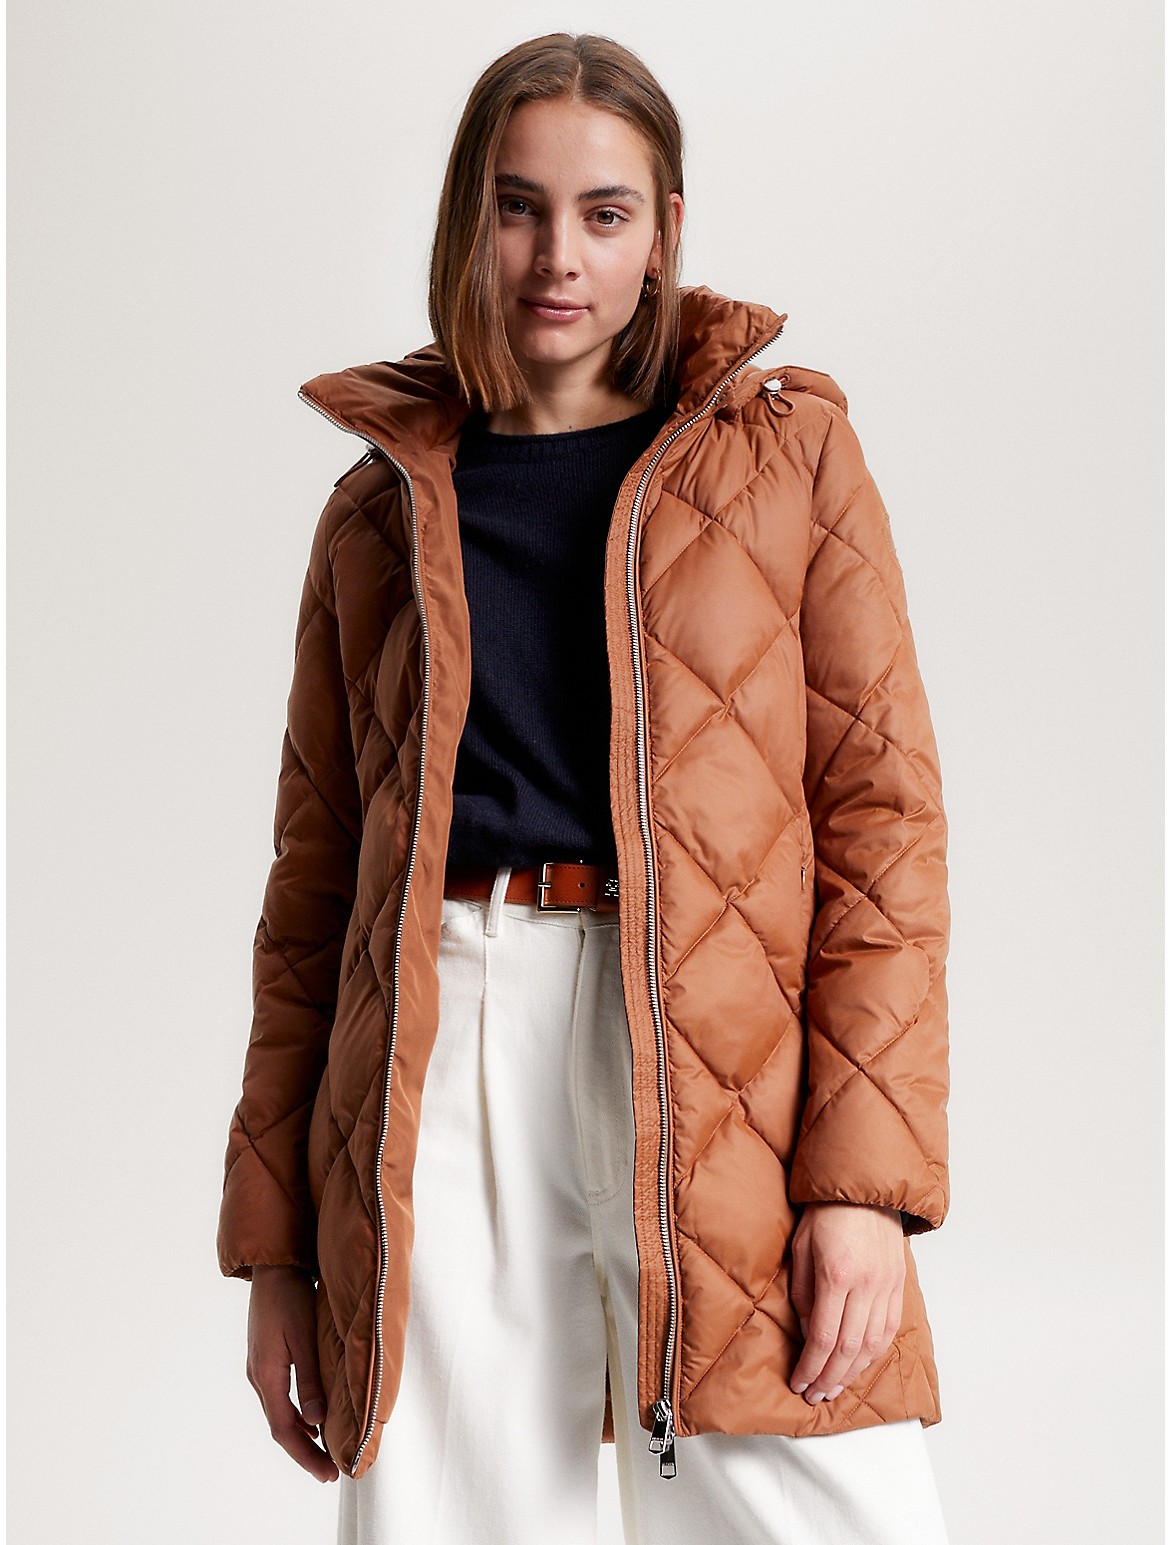 Tommy Hilfiger Women's Belted Quilted Coat - Brown - L